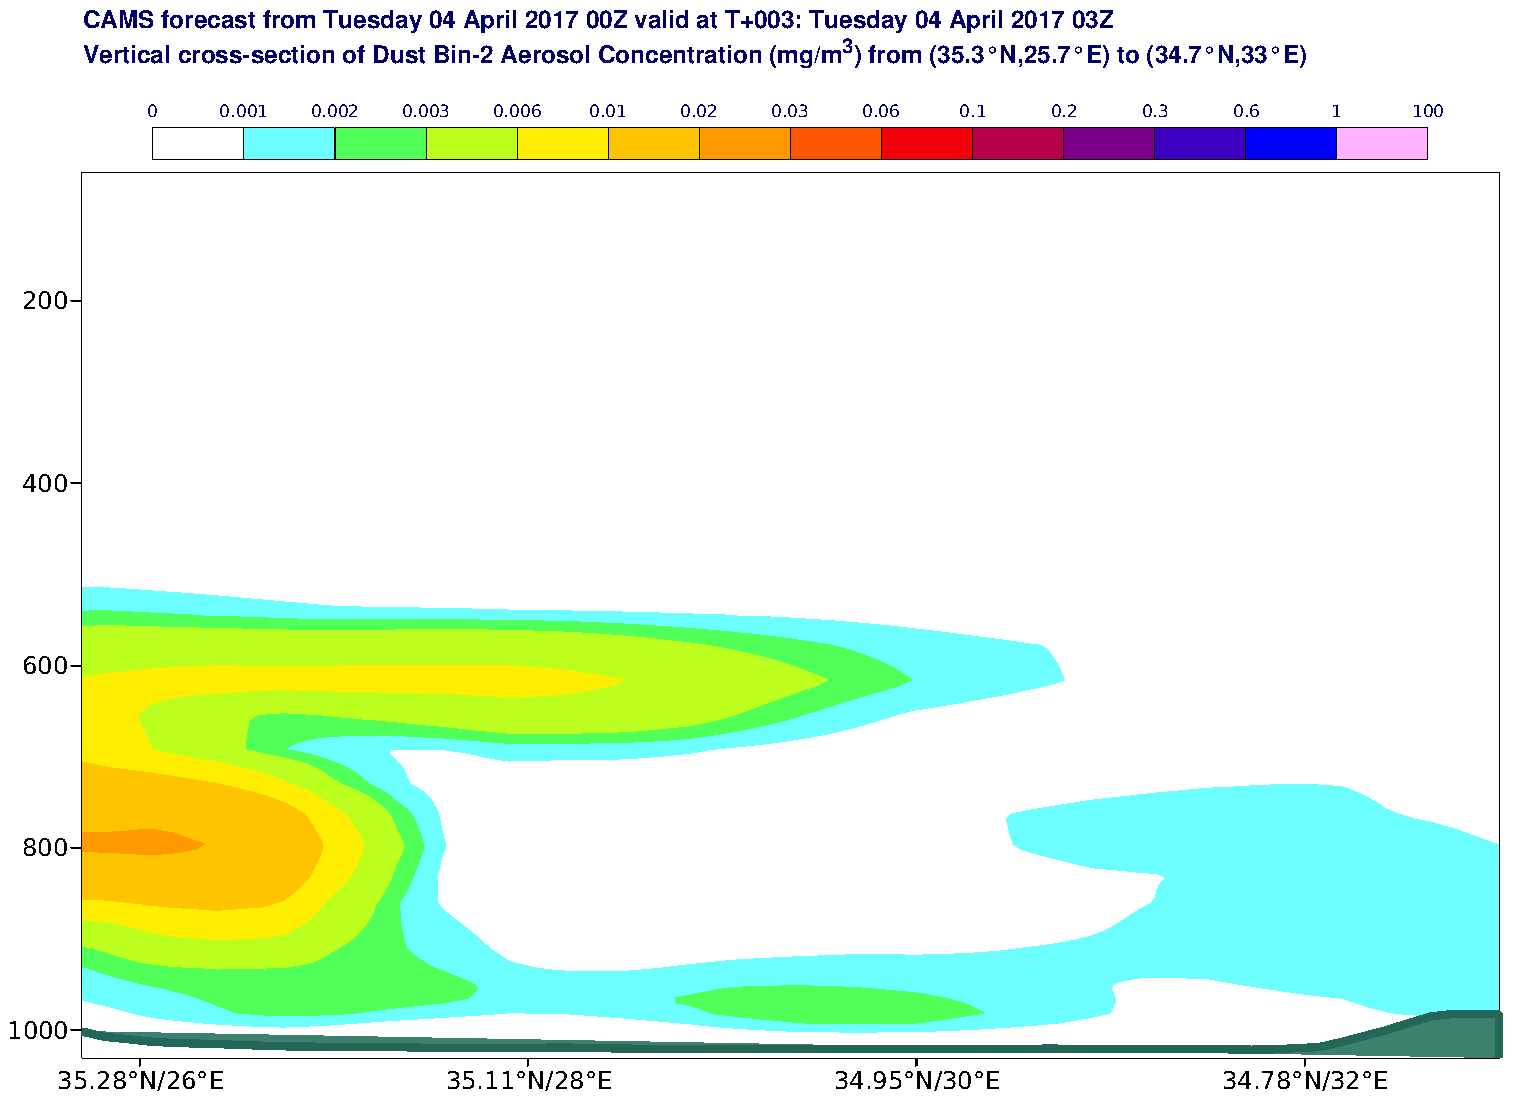 Vertical cross-section of Dust Bin-2 Aerosol Concentration (mg/m3) valid at T3 - 2017-04-04 03:00